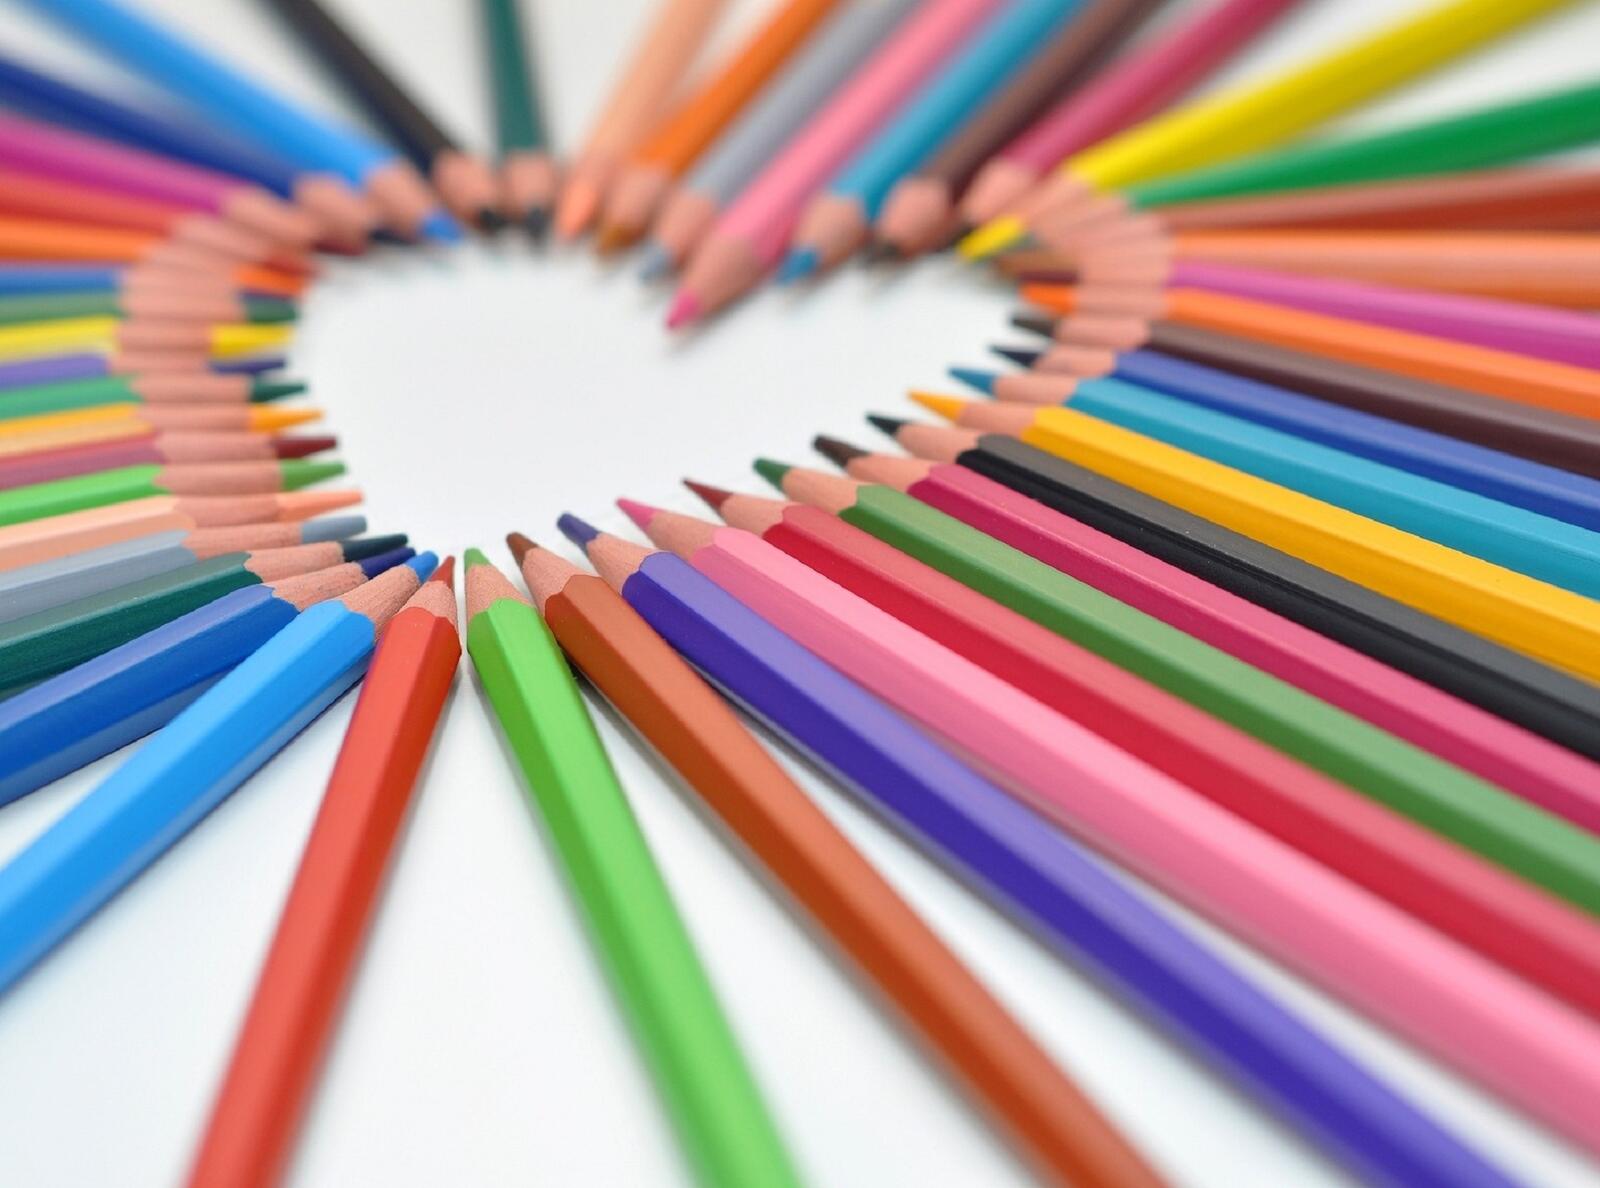 Free photo Colored pencils arranged in the shape of a heart